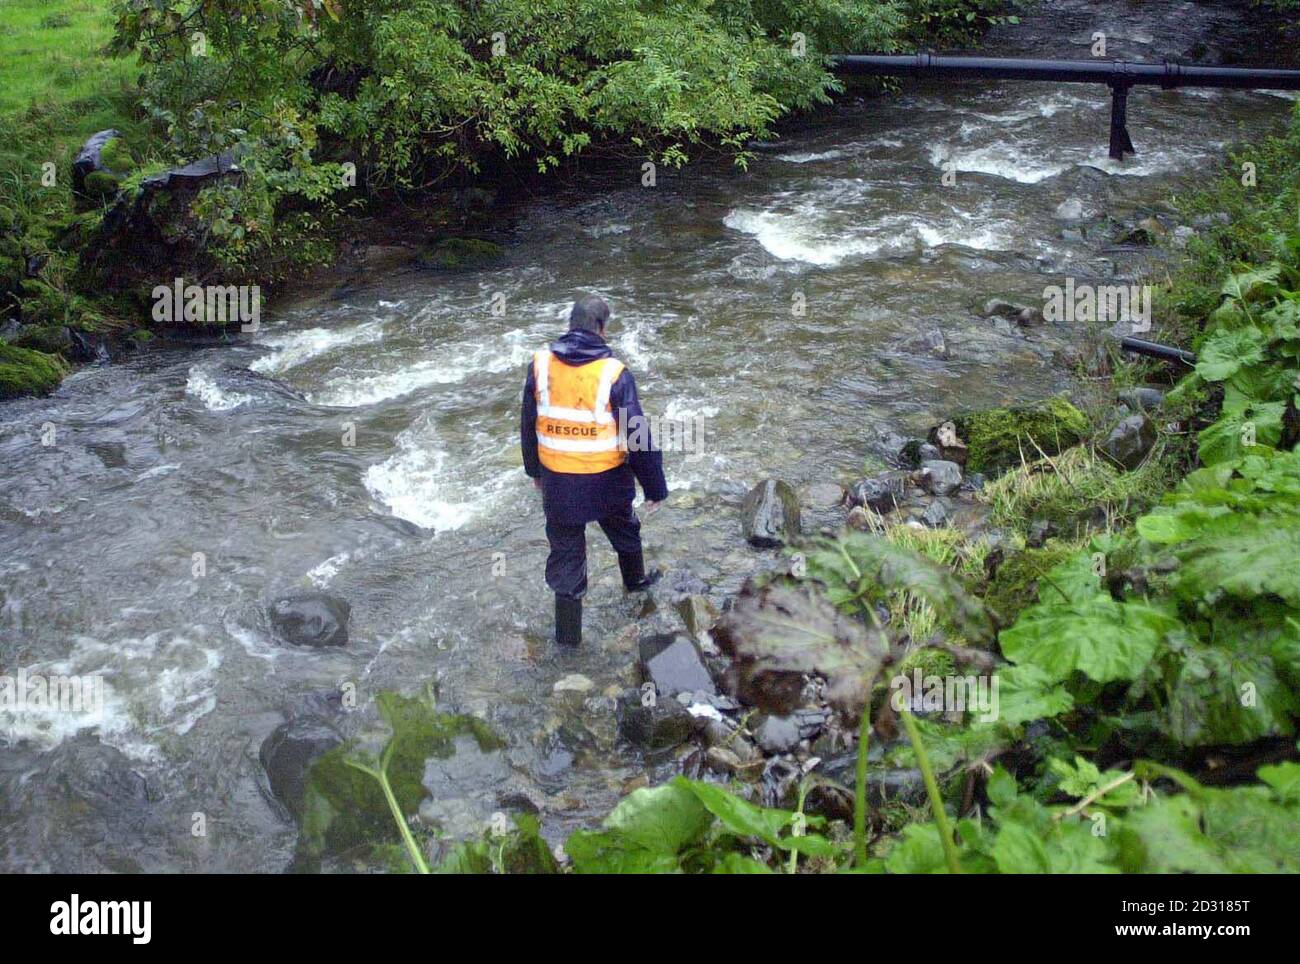 A rescuer trawls the Stainforth Beck to search for two school girls who were swept away as they walked through the fast flowing river during a school trip.  Hopes are fading however as the search resumed hampered by weather conditions.   08/03/02 : An inquest jury at Harrogate Magistrates Court decided the deaths of two teenage girls, Rochelle Cauvet, 14, and 13-year-old Hannah Black, were an accident, Friday 8 March, 2002, recording a verdict of accidental death.  They heard how the two girls were washed away while taking part in a river walk in Stainforth Beck, near Settle, North Yorkshire o Stock Photo